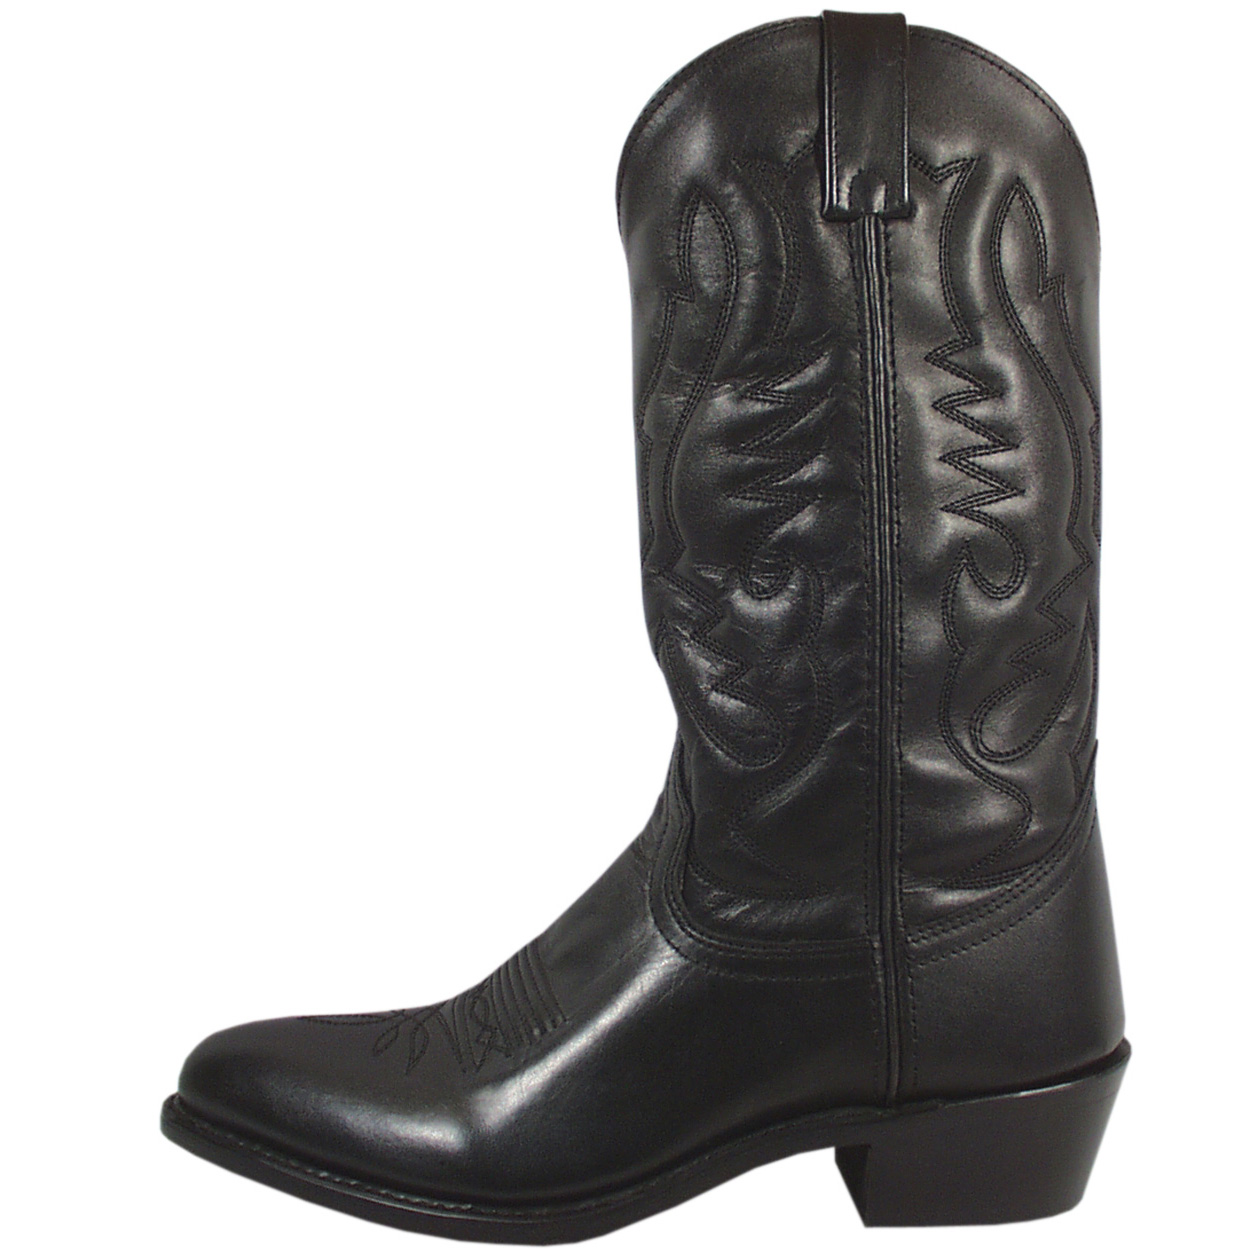 Smoky Mountain Boots Men's 4032 Denver 11" Leather Cowboy Boot Wide Width Available - Black